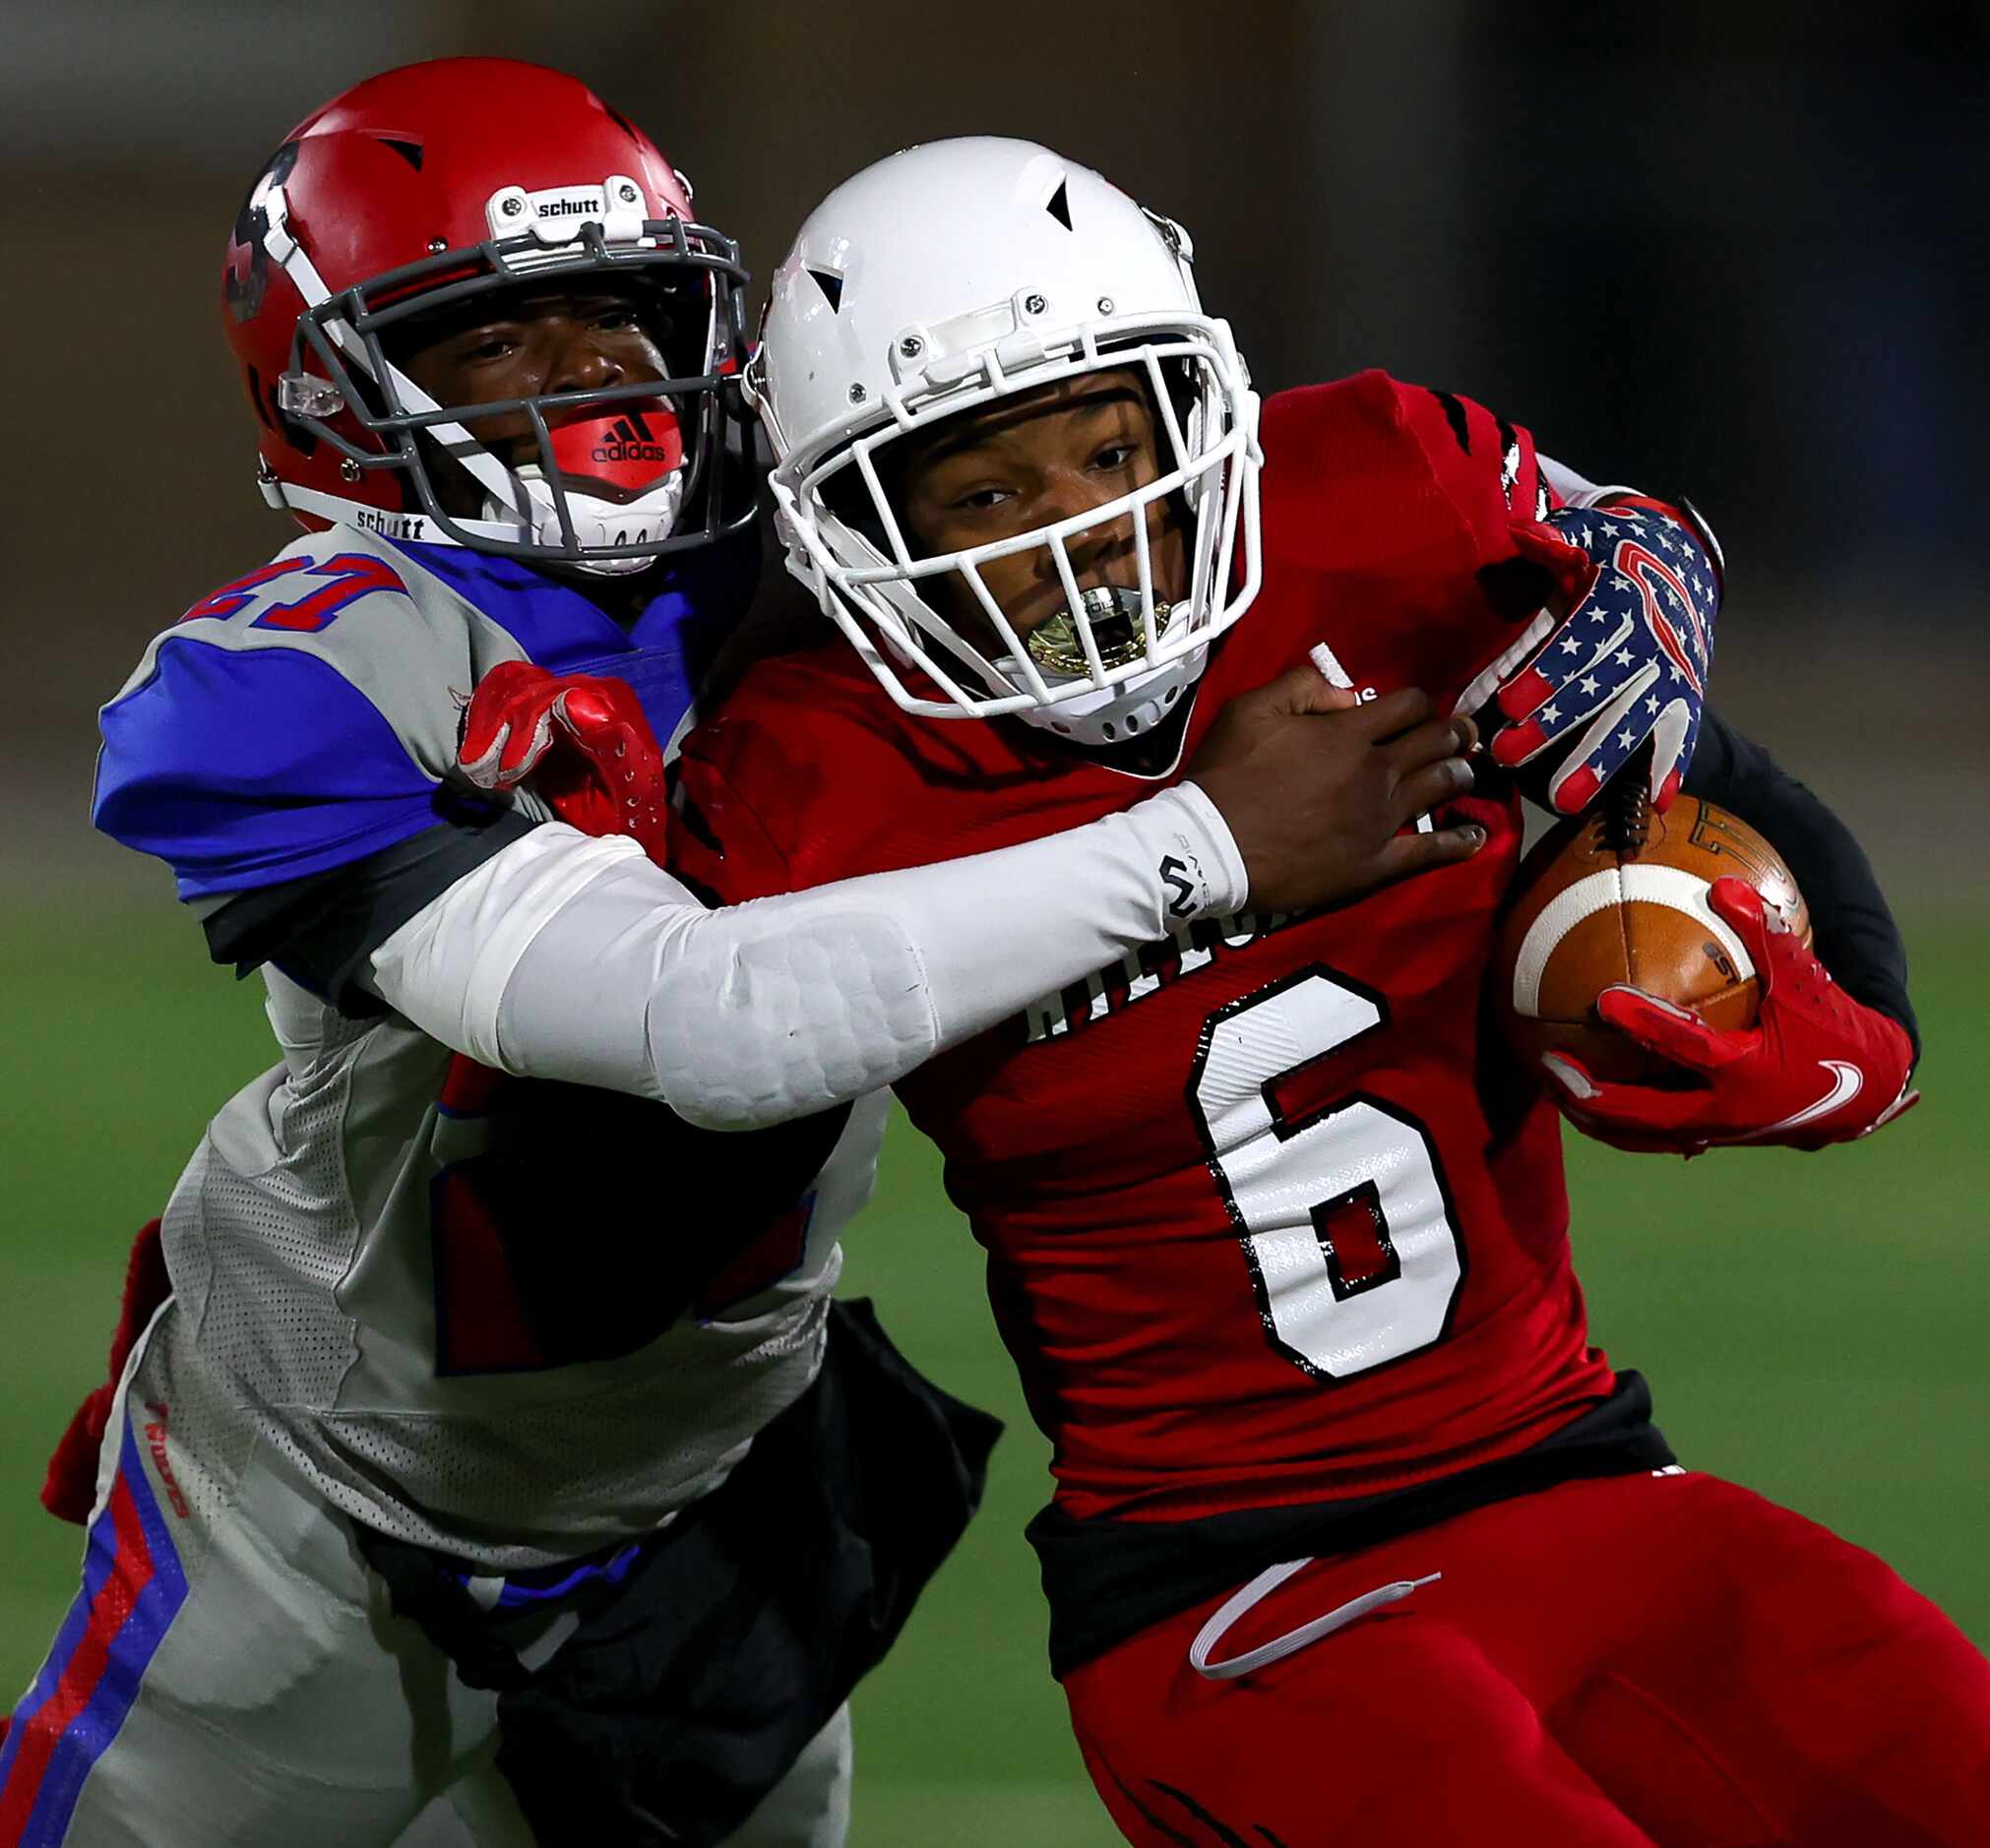 Hillcrest running back Jaden Hodge (6) is tackled on the play by Spruce linebacker Jayshawn...